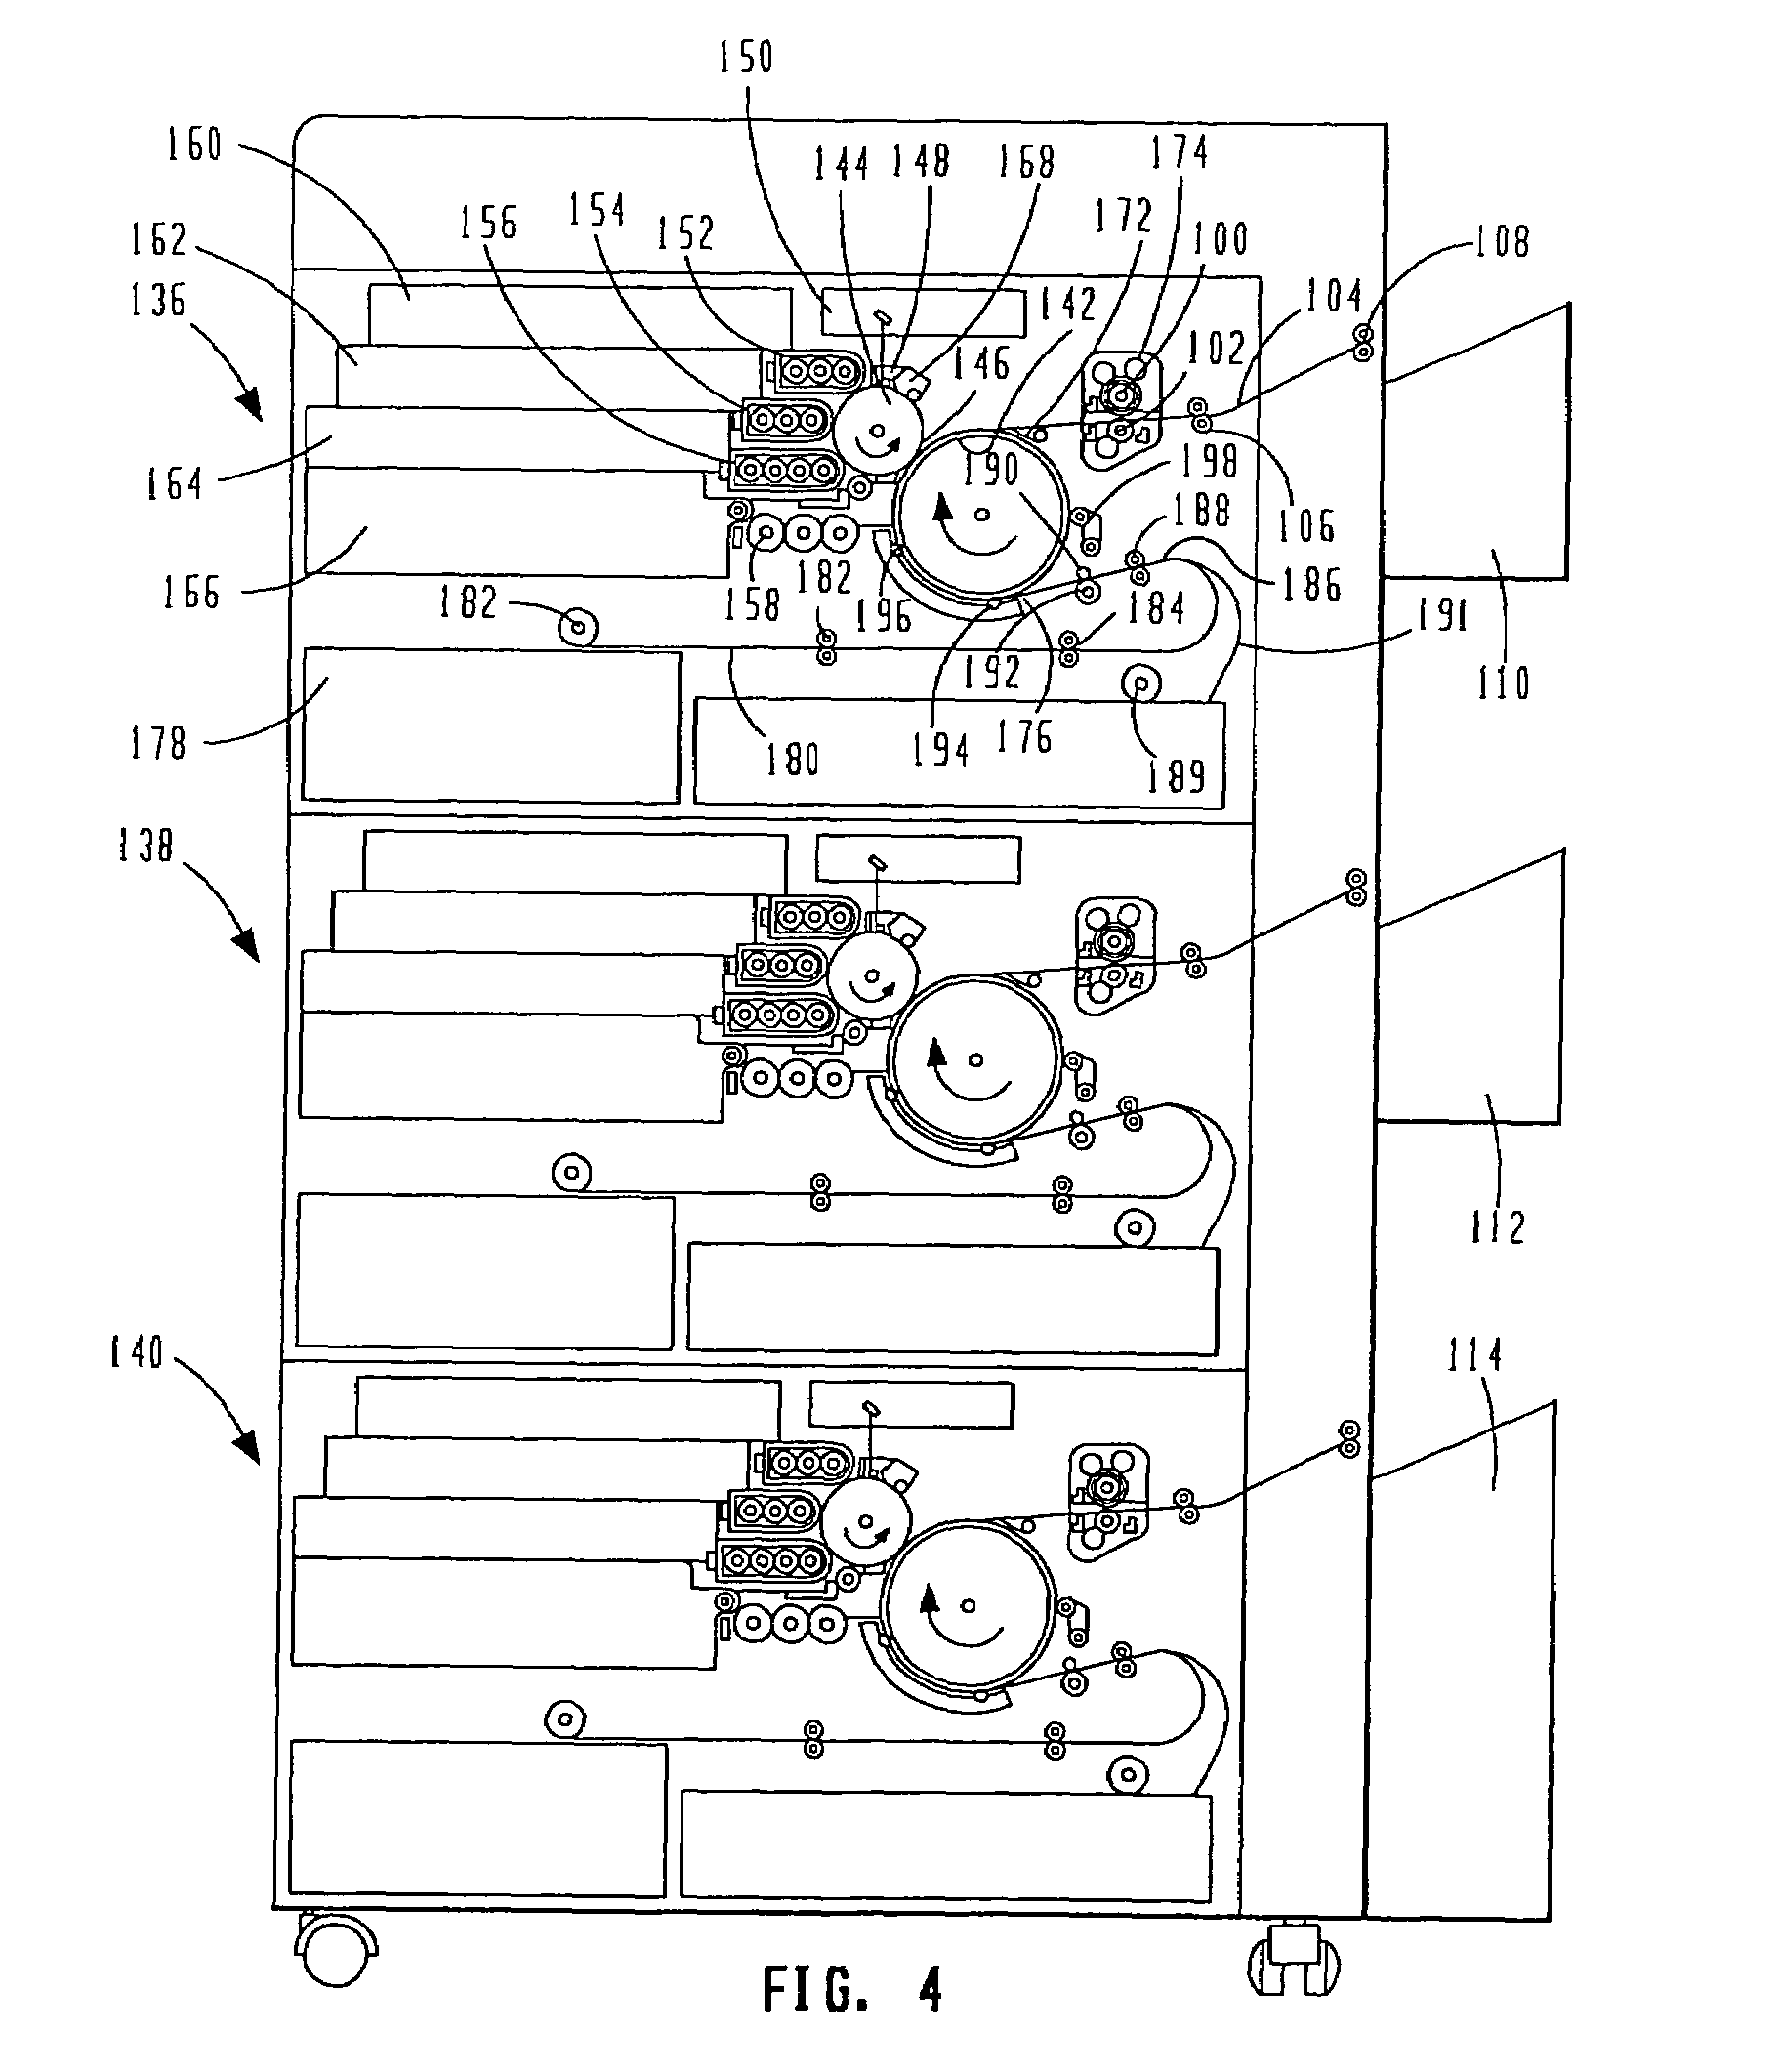 Method and apparatus for providing a color-balanced multiple print engine